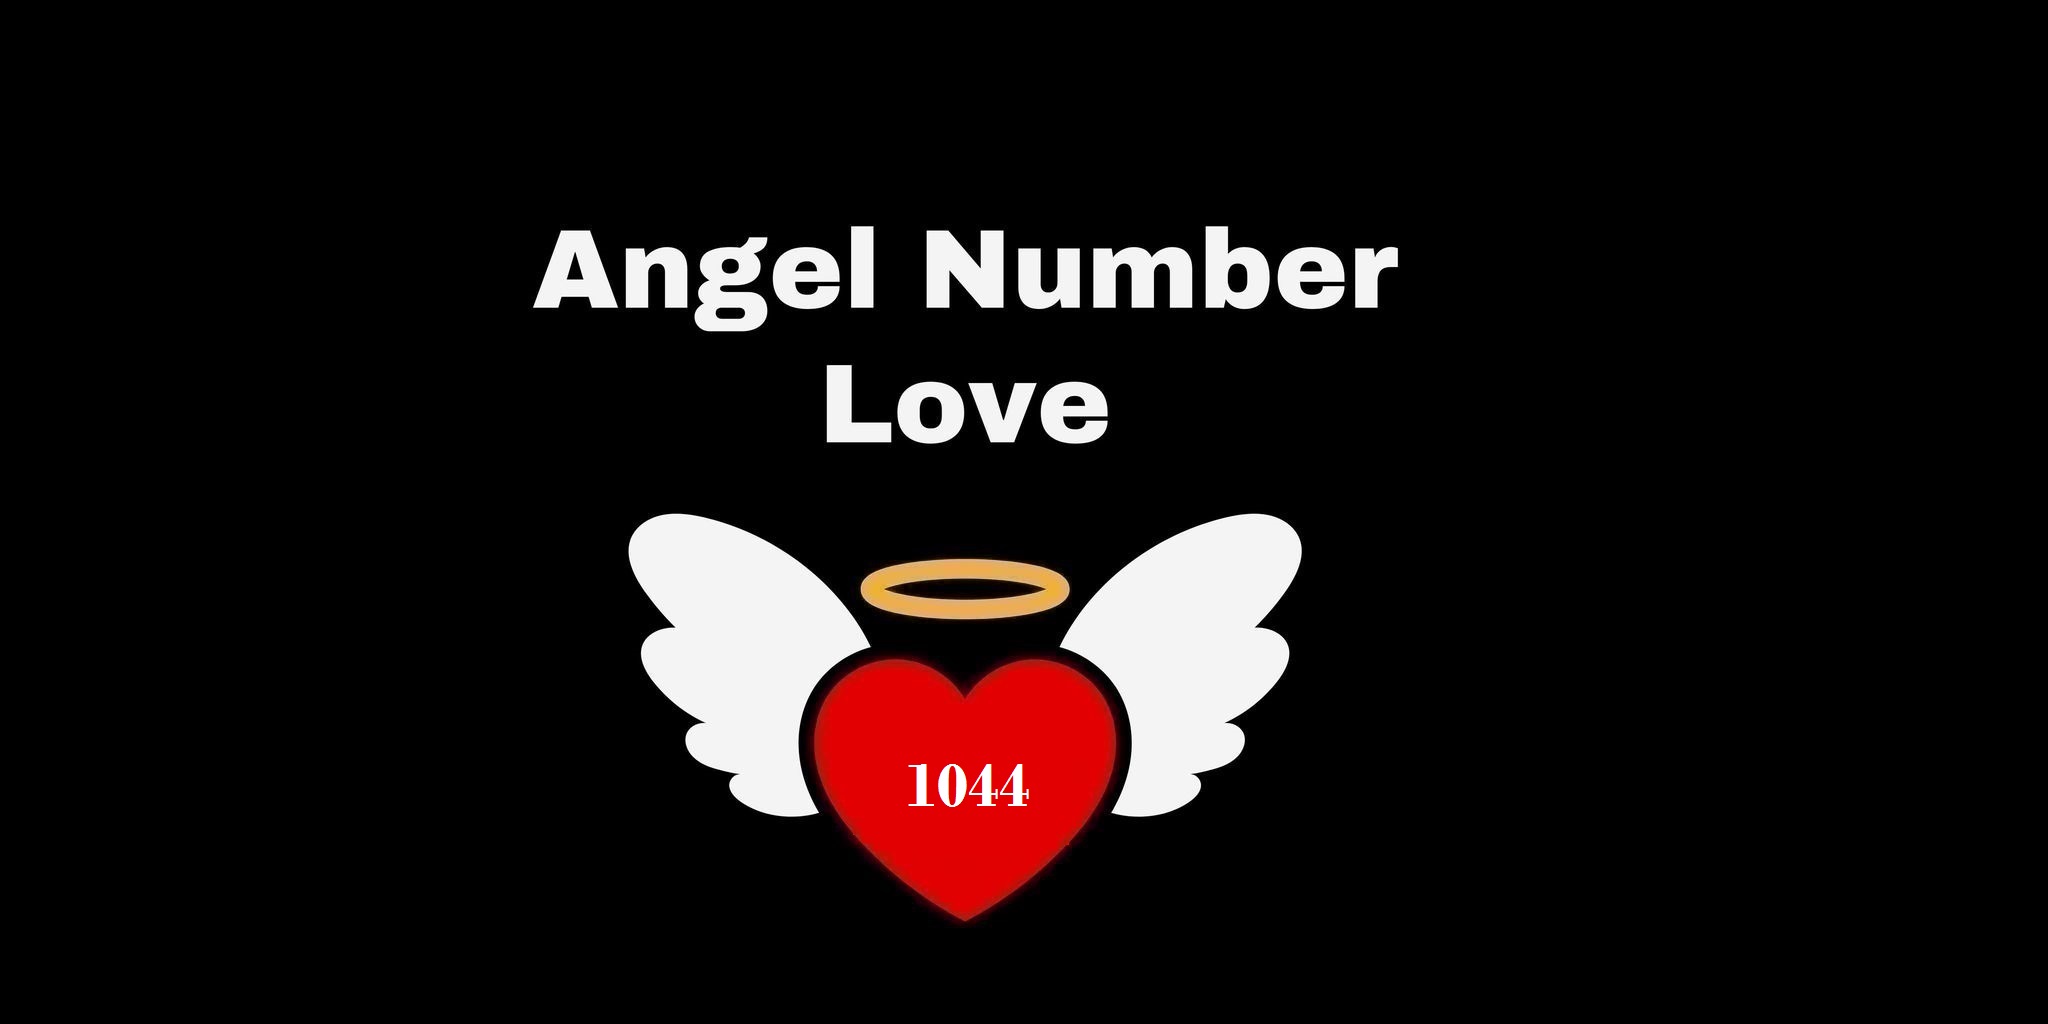 1044 Angel Number Meaning In Love